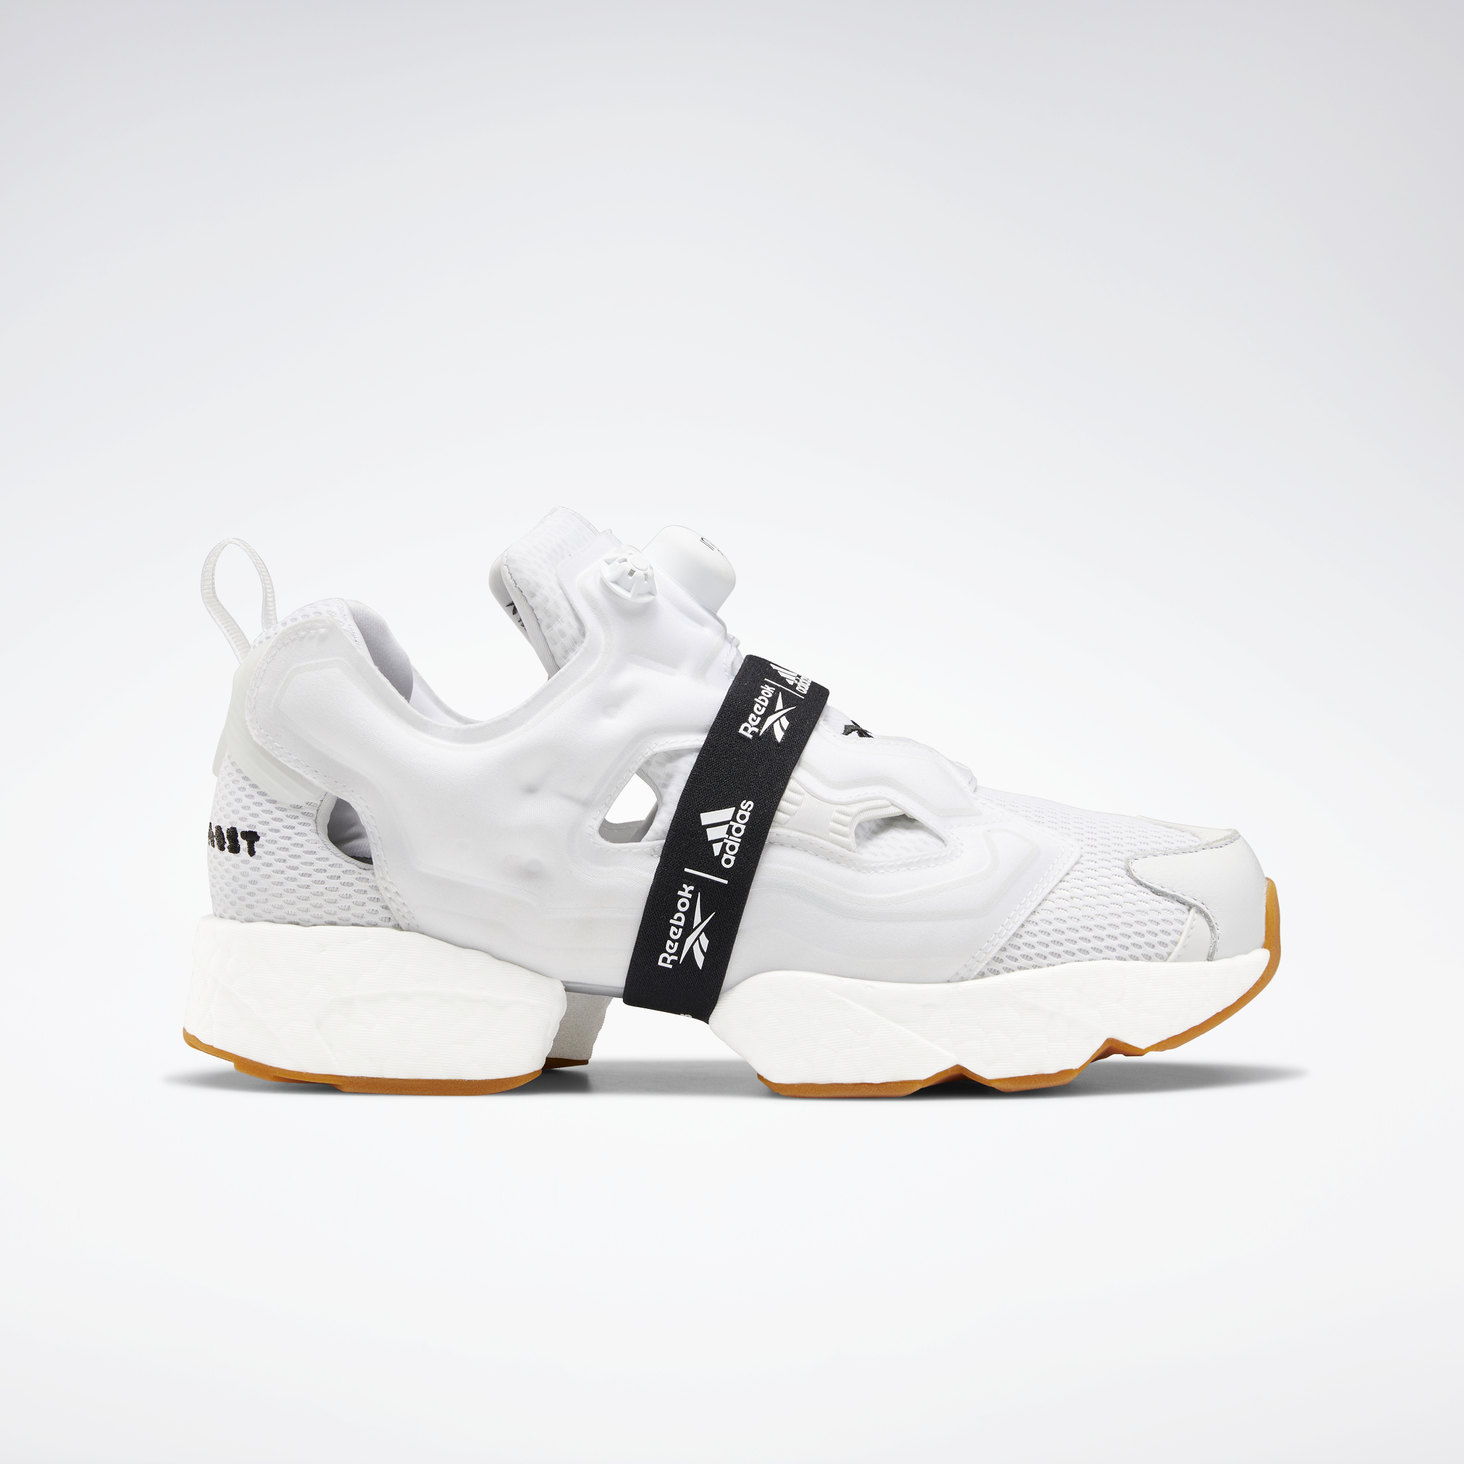 Instapump Fury Boost shoes